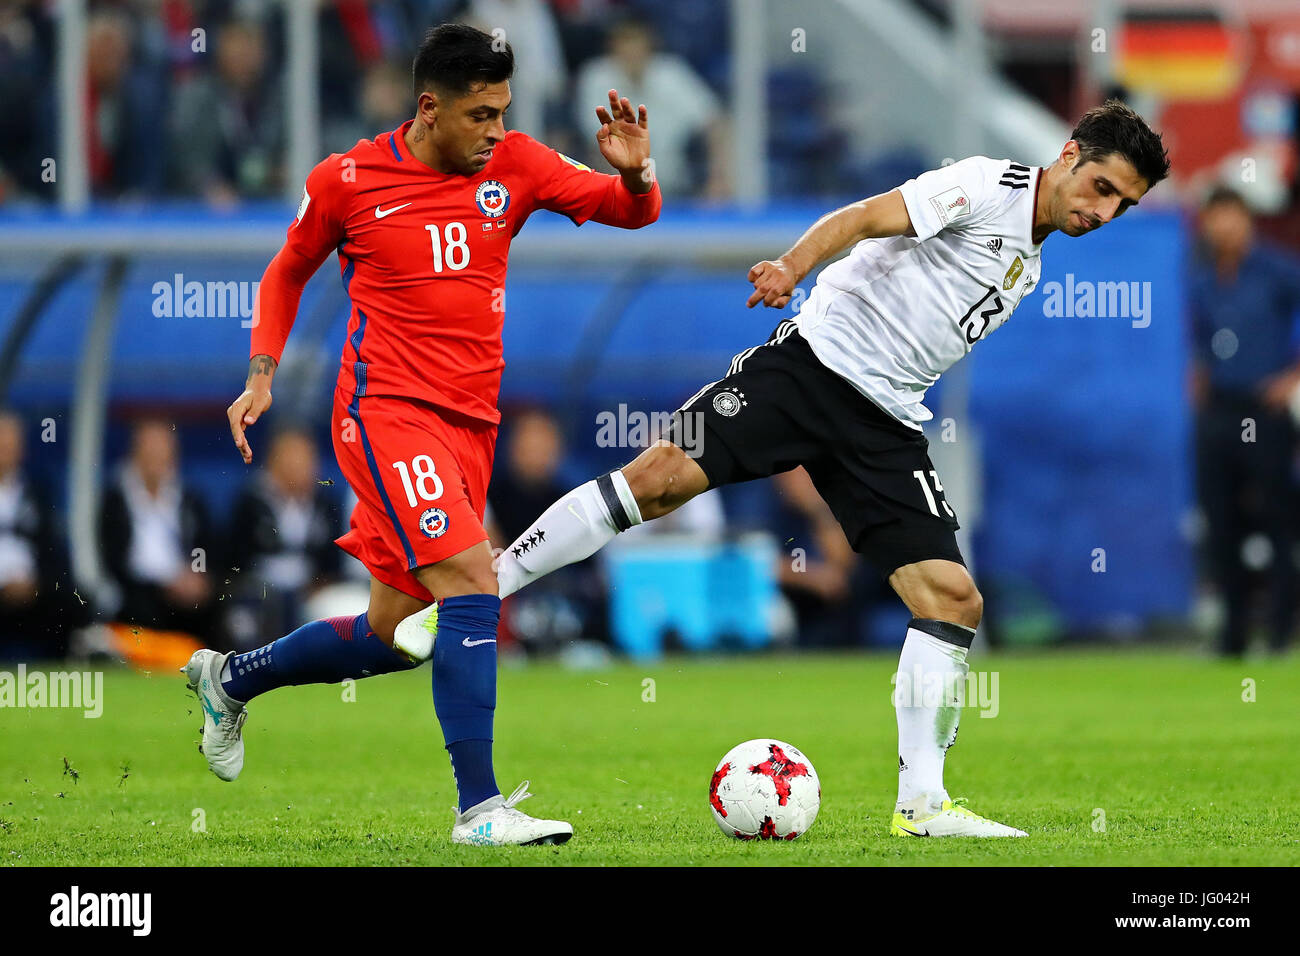 St. Petersburg, Russia. 2nd July, 2017. Gonzalo Jara of Chile contests with Lars Stindl of Germany during a match between Chile and Germany valid for the 2017 Confederations Cup Final this Sunday (02), held at the Krestovsky Stadium (Zenit Arena) in St. Petersburg, Russia. (Photo: Heuler Andrey/DiaEsportivo/Fotoarena) Stock Photo